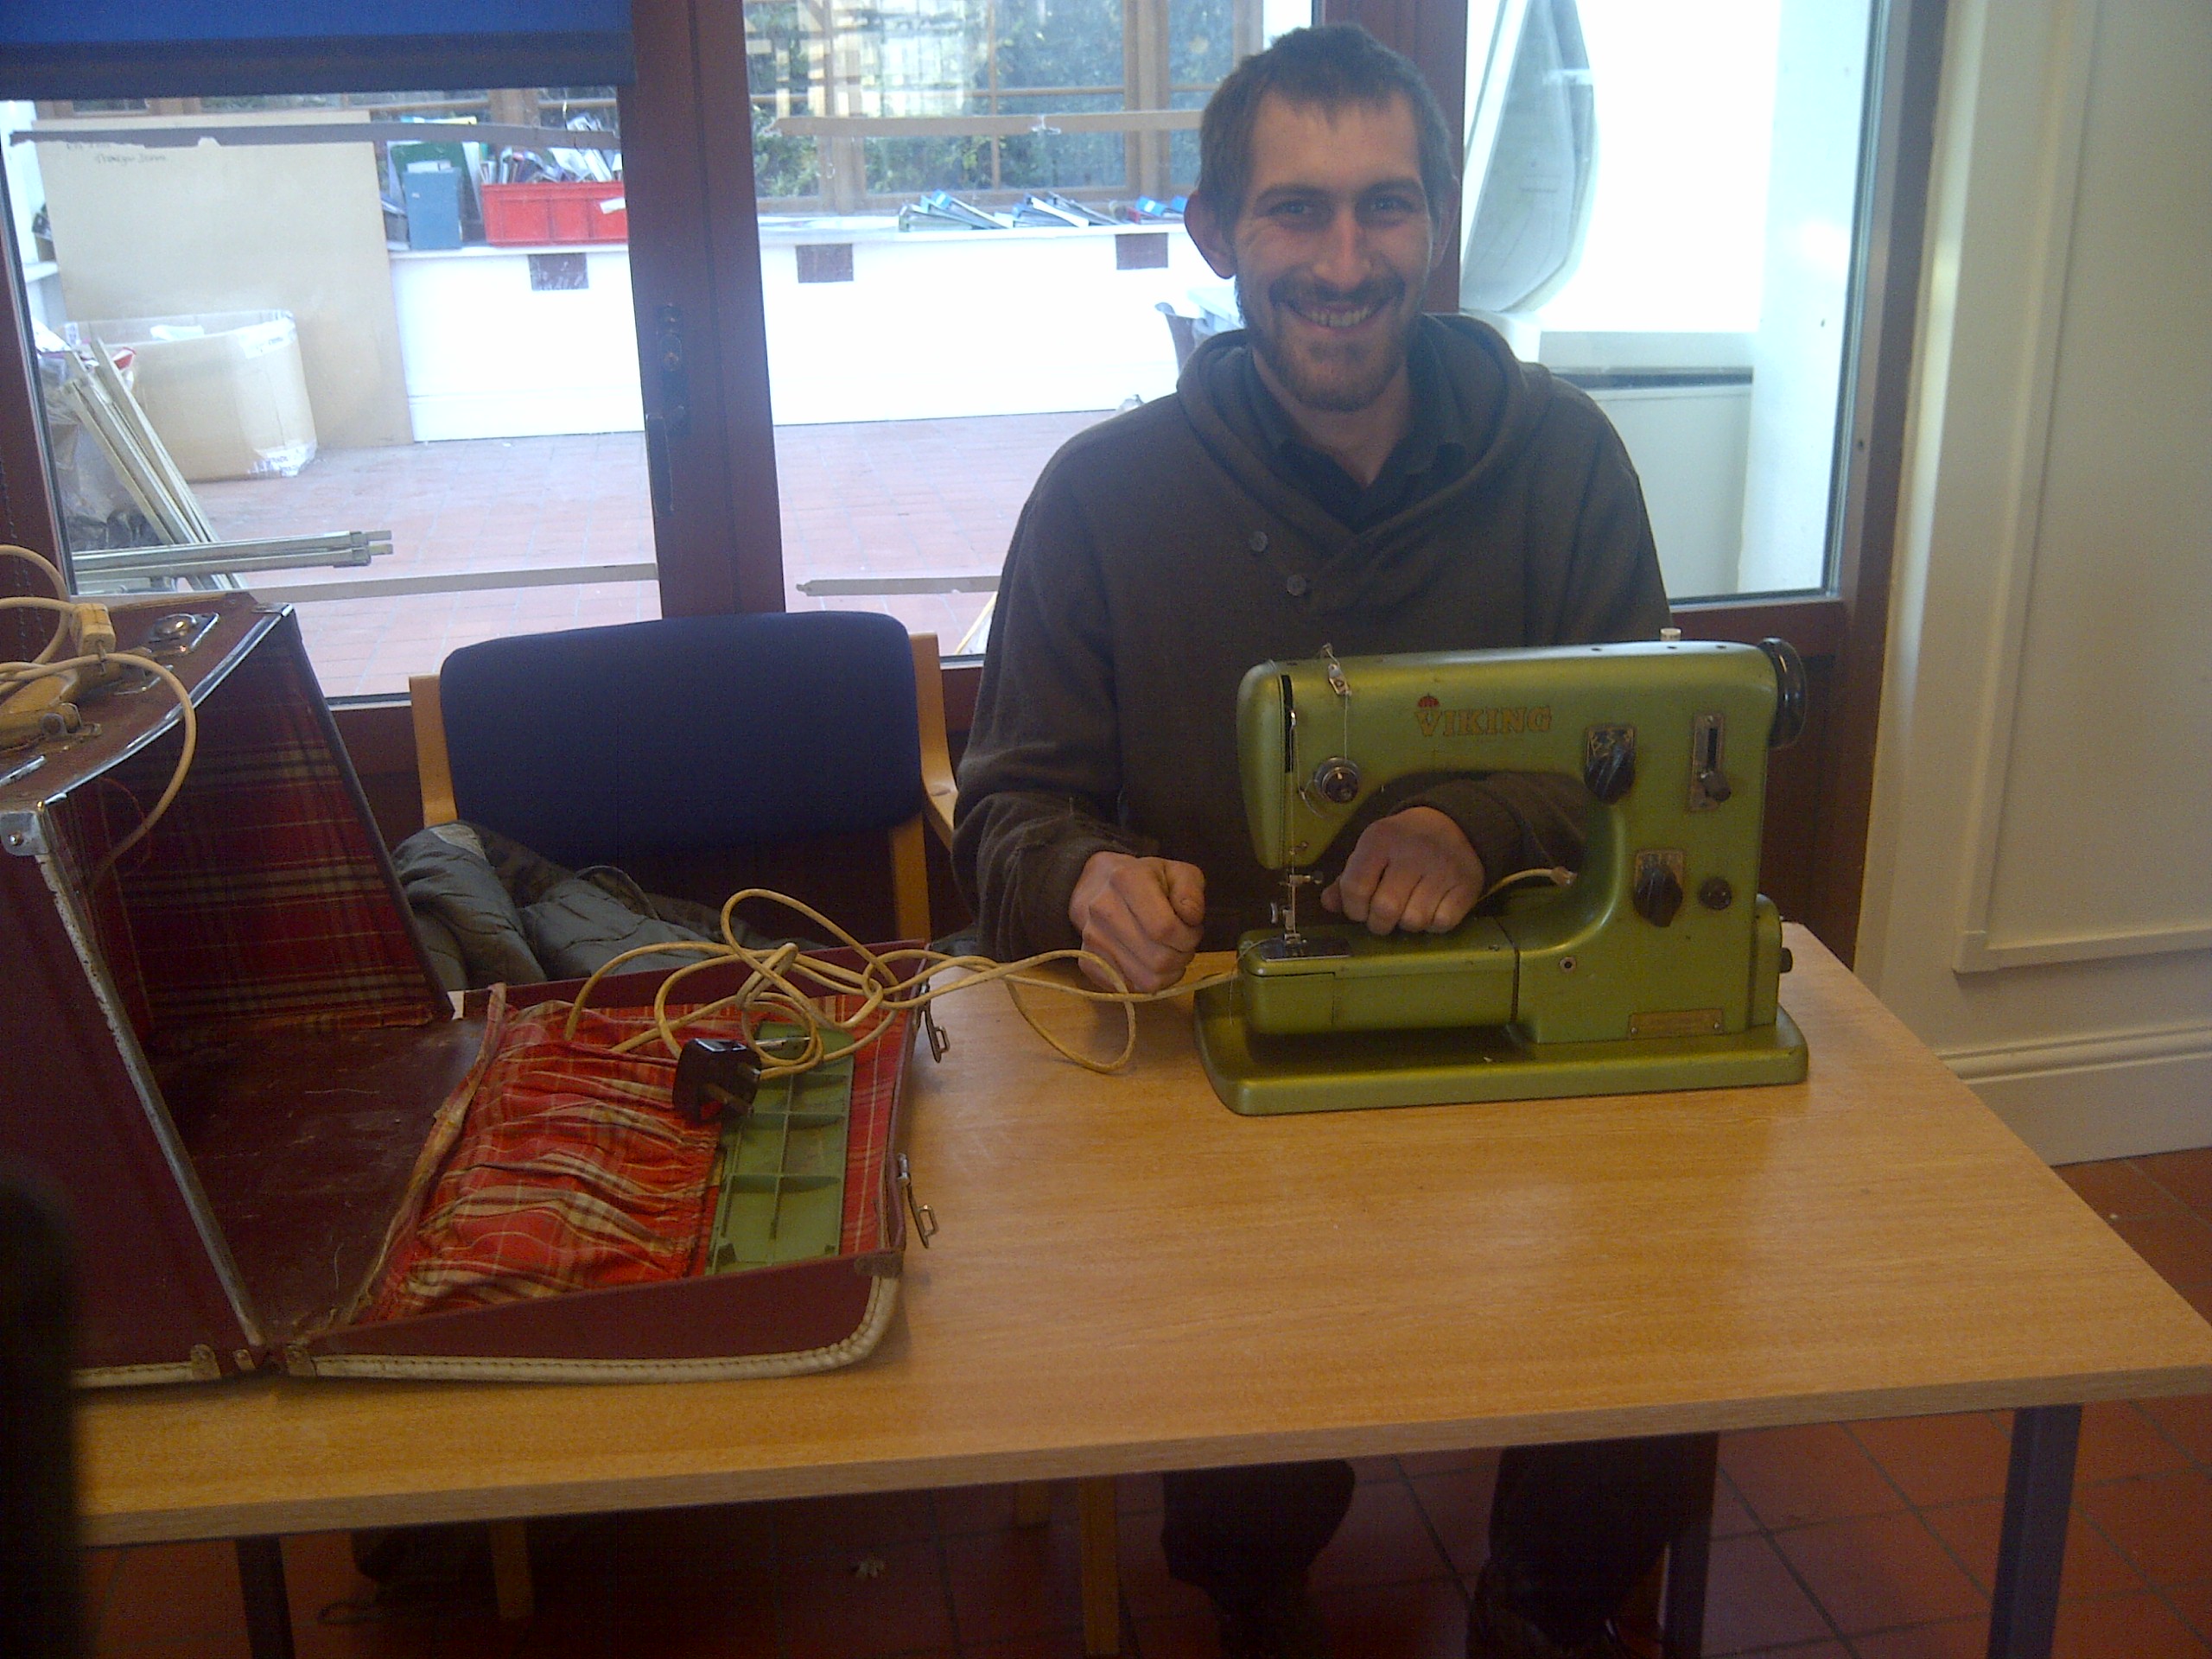 One satisfied customer with his newly working classic sewing machine at a Repair cafe event at Heeley City Farm in 2013